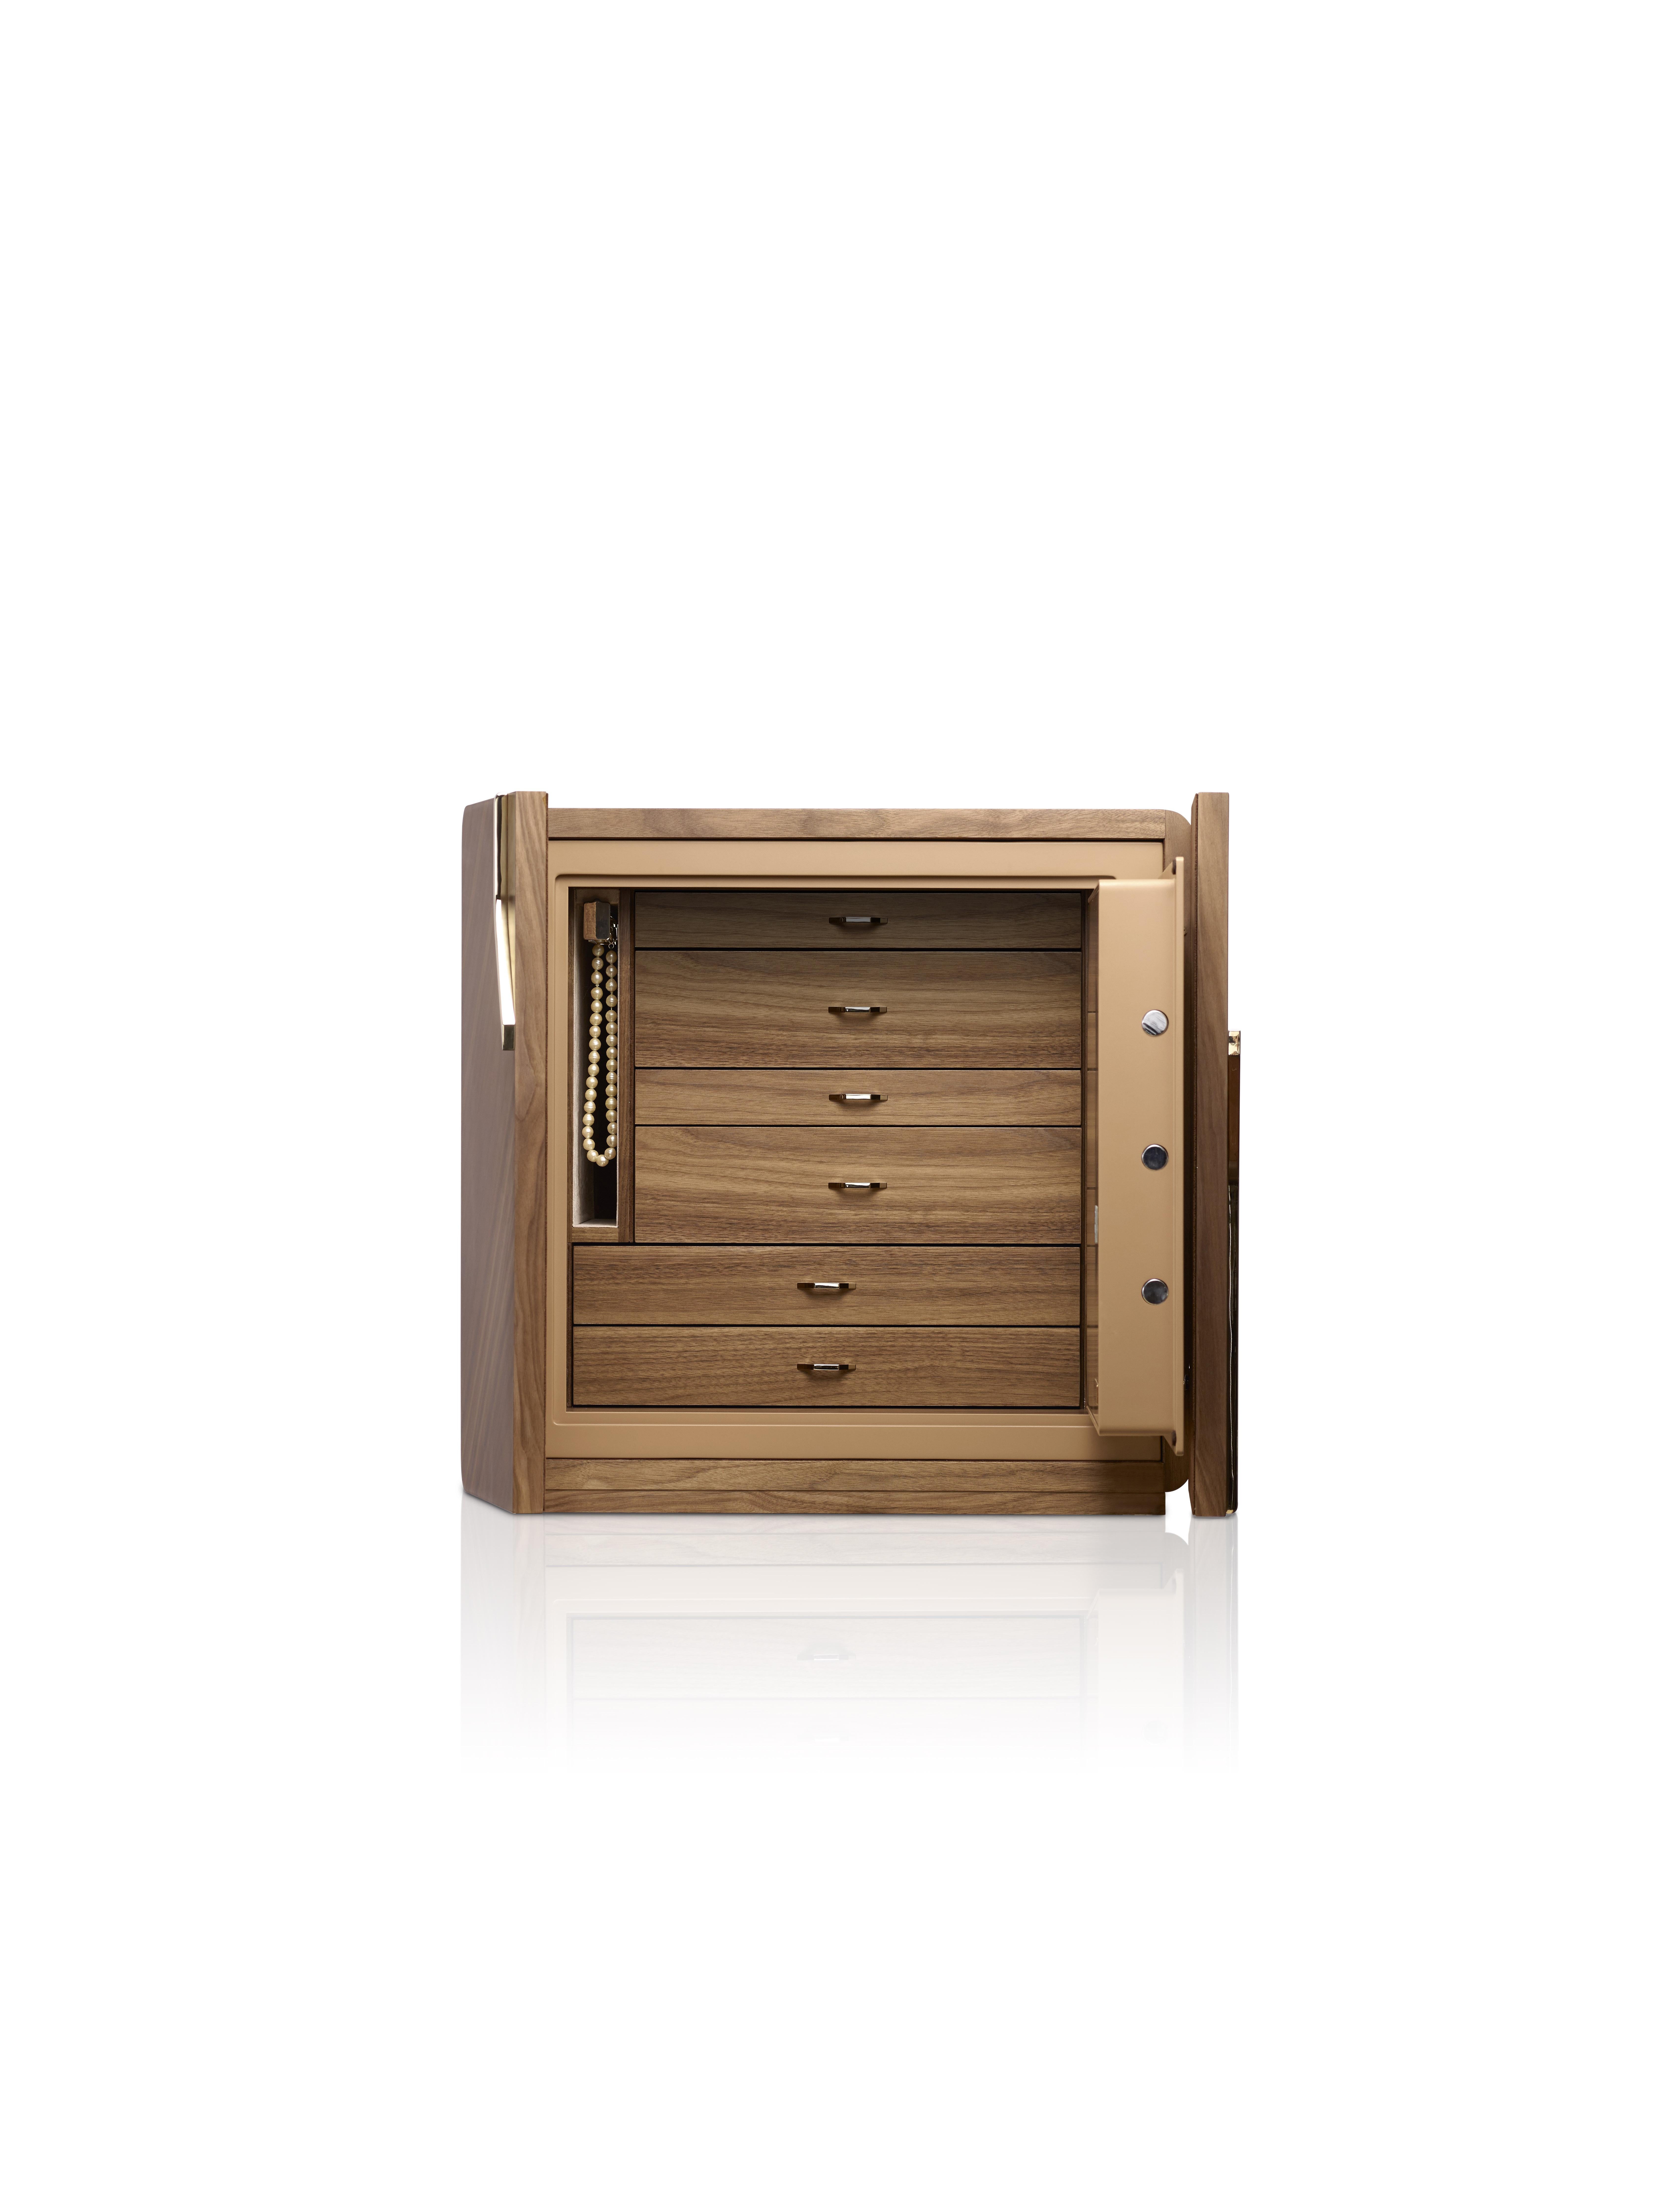 Polished walnut armoured chest, matte finish,
24 karats gold plated accessories. Round
handle with biometric opening device and
emergency key integrated. Inside pull out
necklace holder and drawers lined for jewellery.
